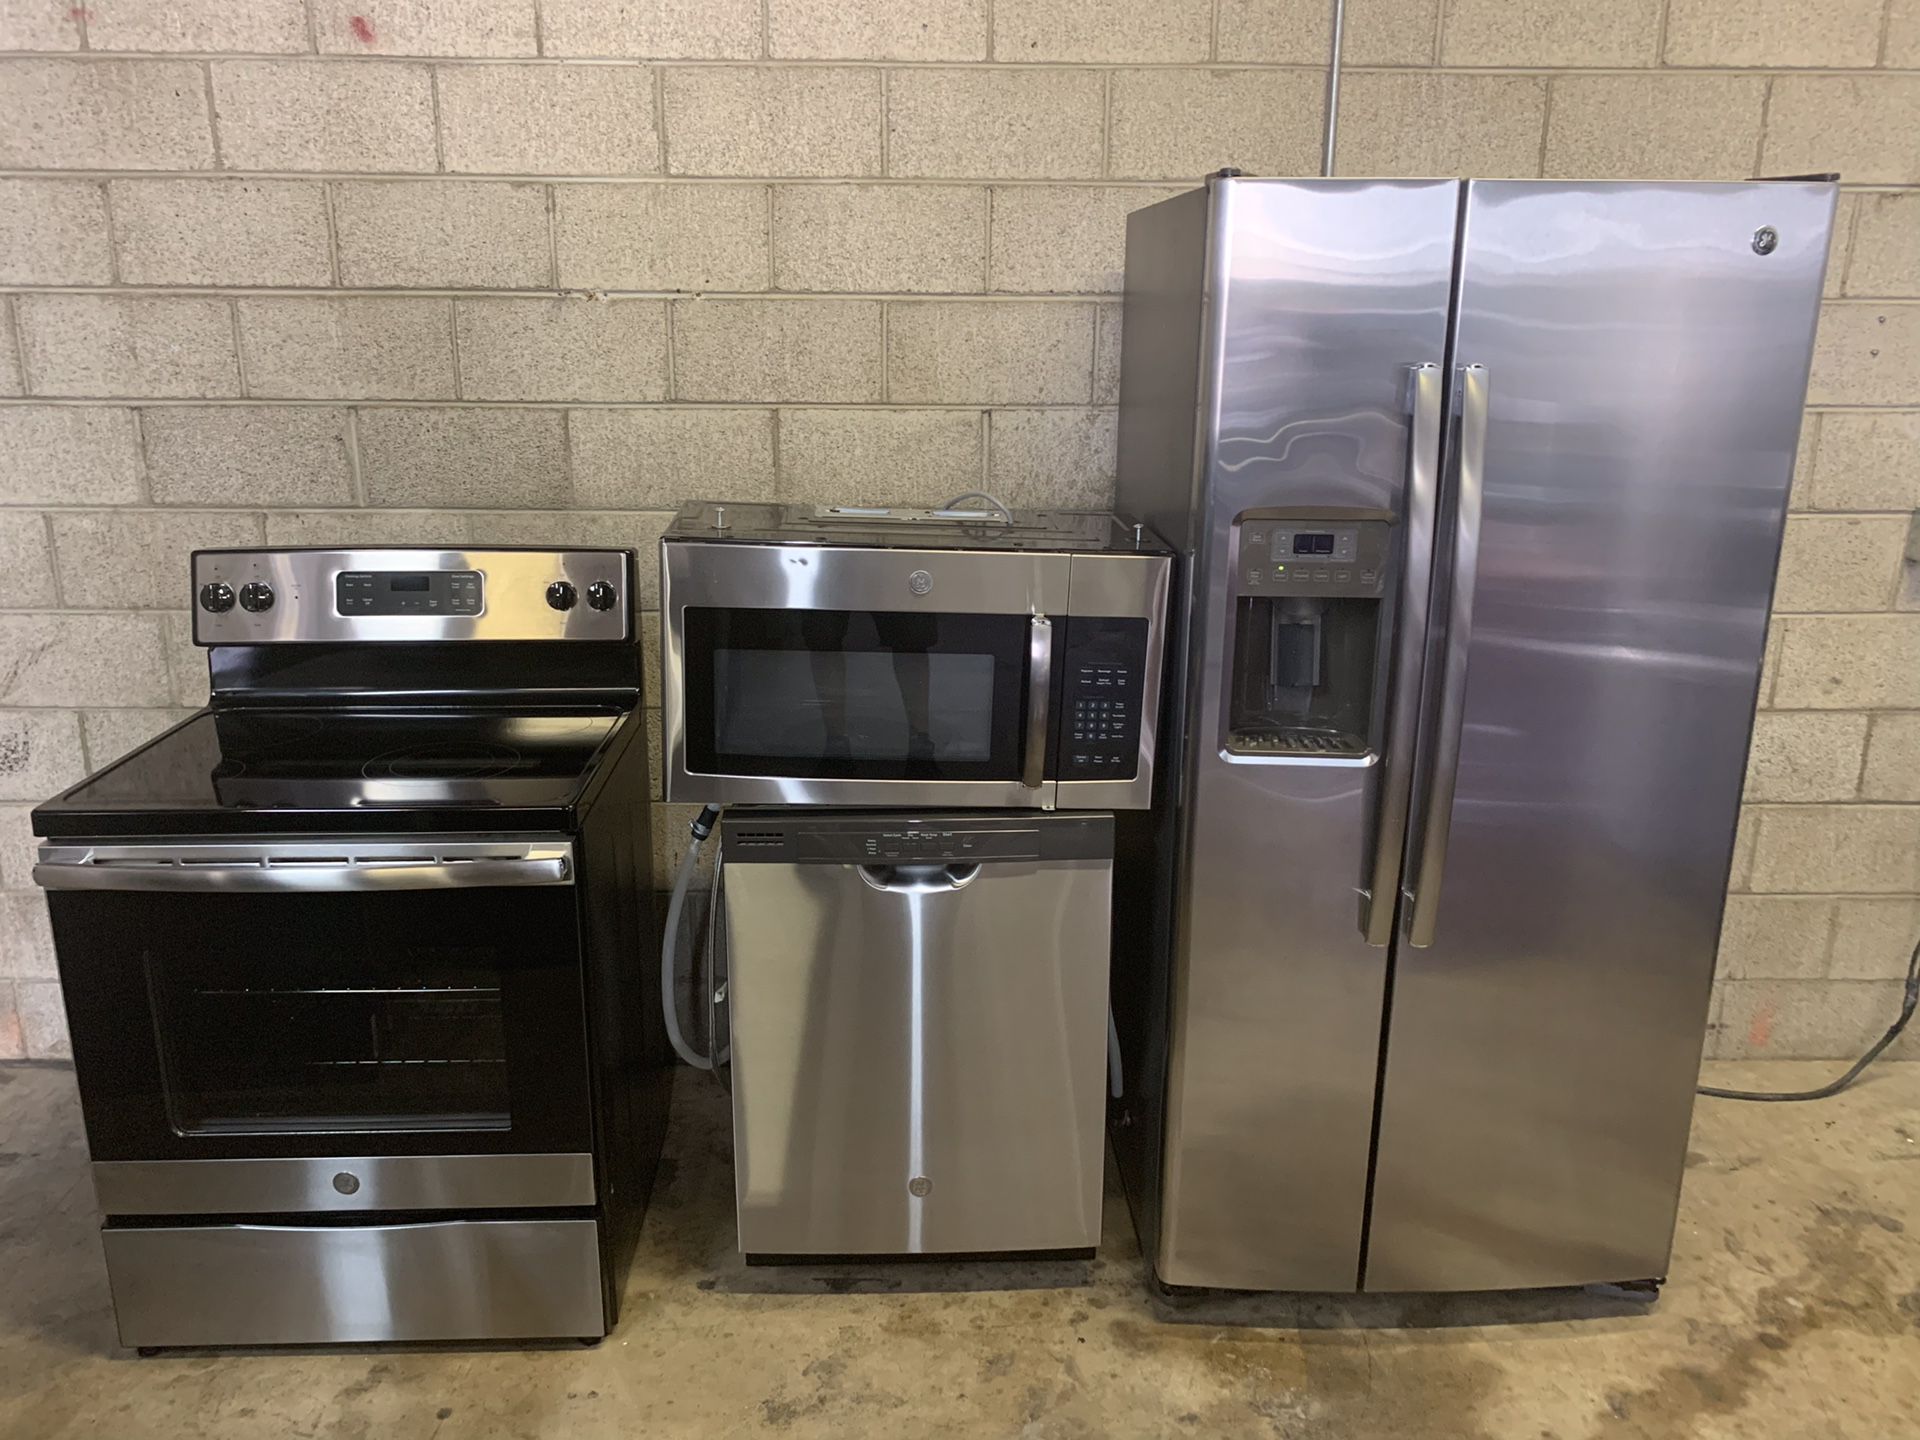 VERY NICE SET OF GE STAINLESS STEEL KITCHEN APPLIANCES SET